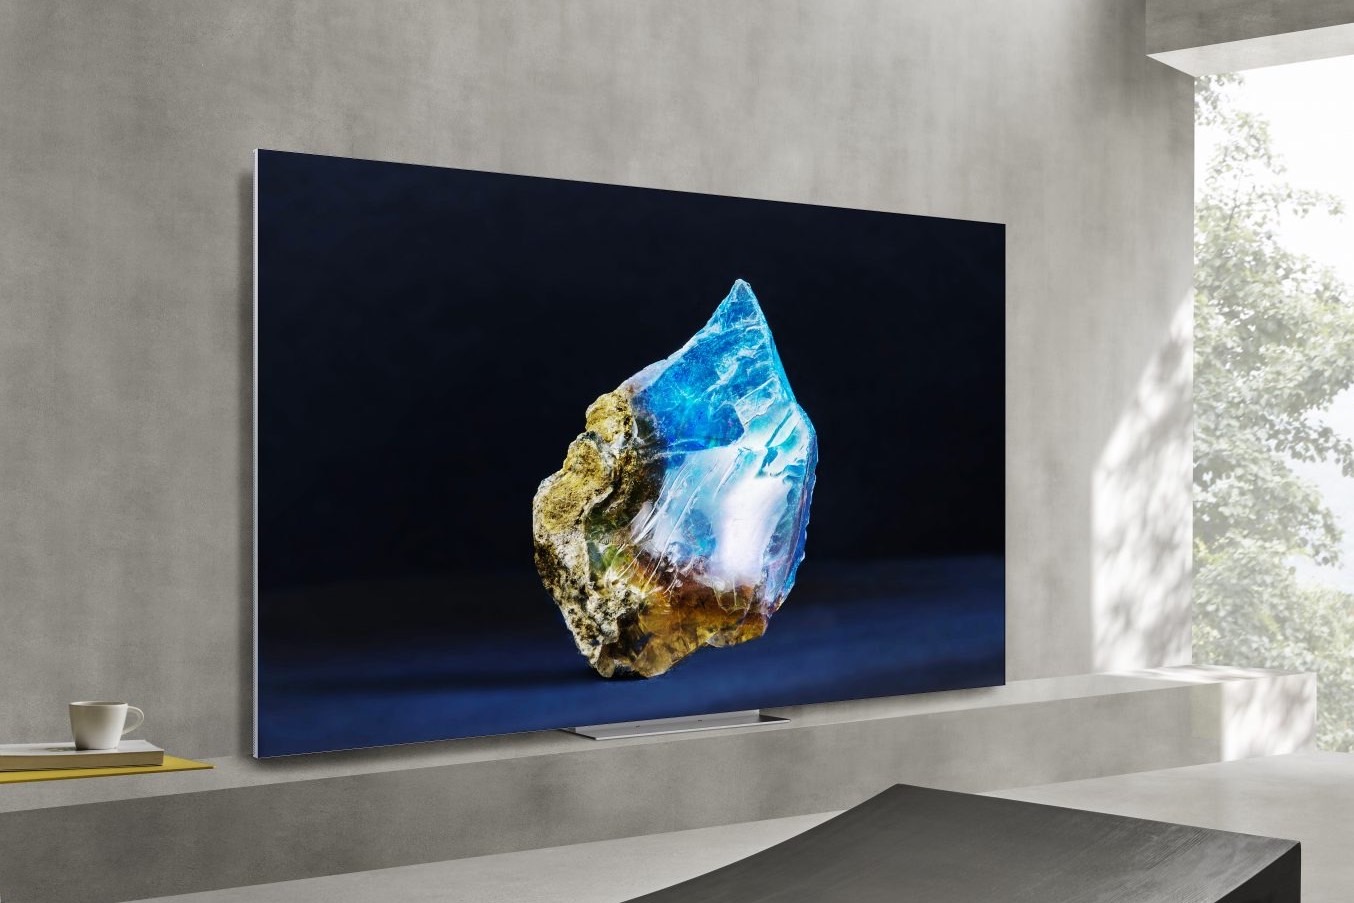 CES 2023: Samsung shrinks its microLED TV down to 76 inches